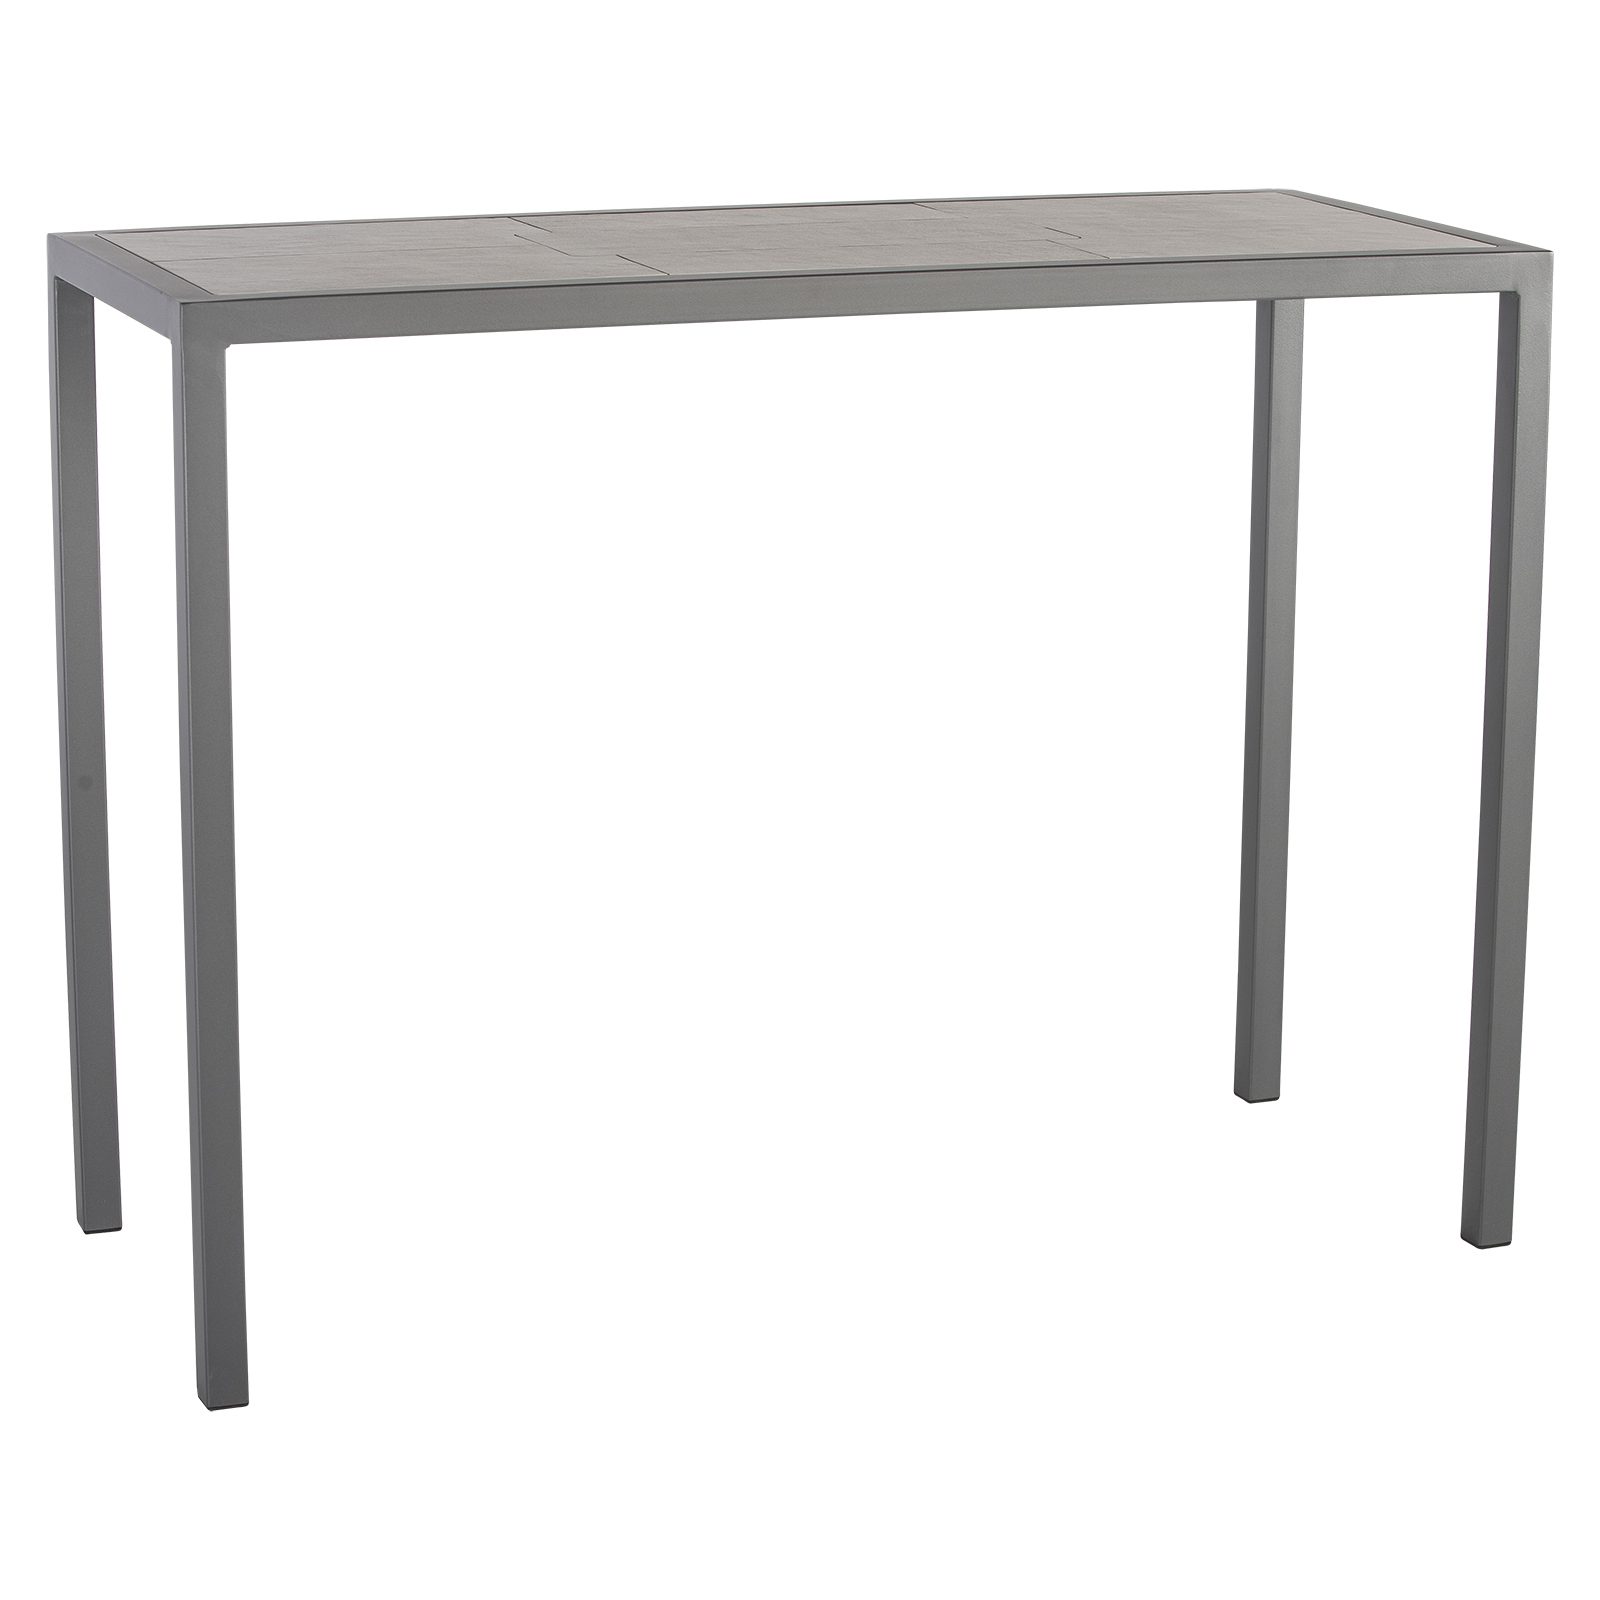 21" x 57" Counter Table - Fully Welded Tables - Quadra Iron Tables 12